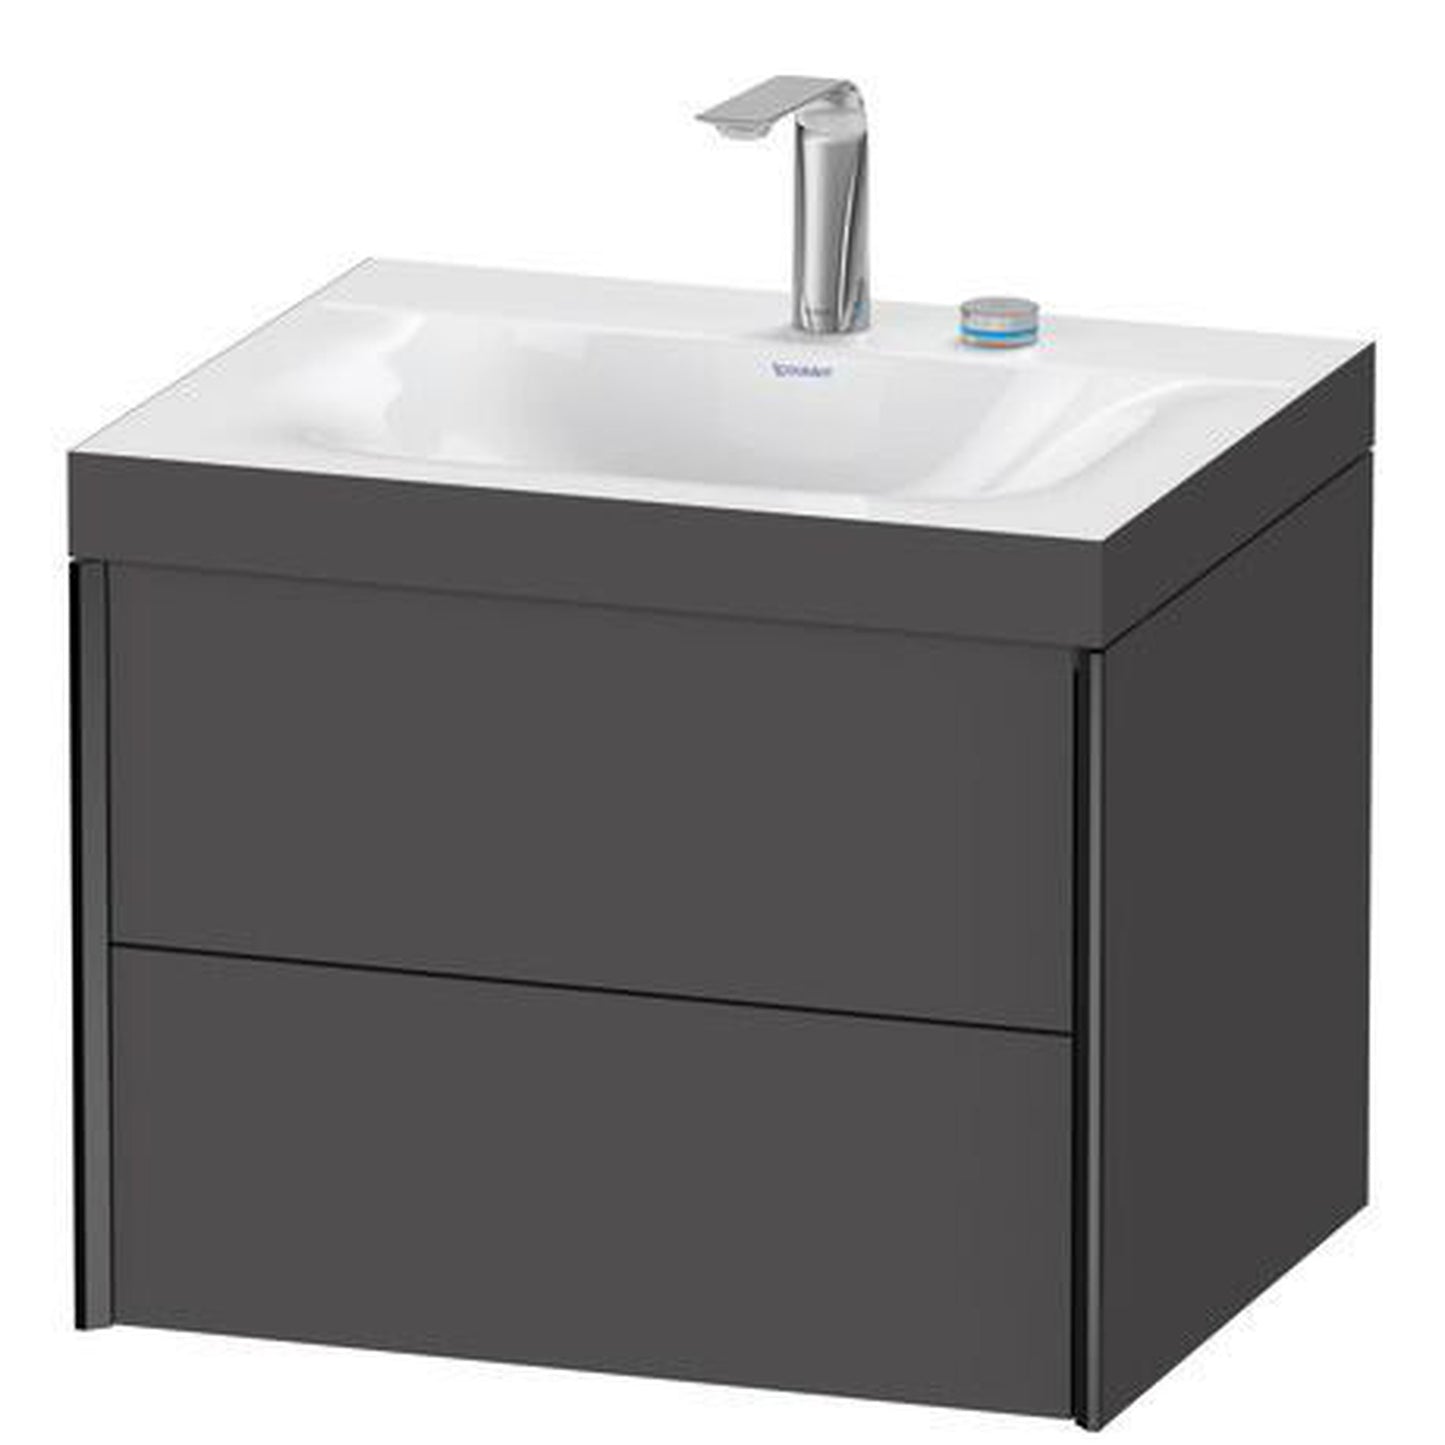 Duravit Xviu 24" x 20" x 19" Two Drawer C-Bonded Wall-Mount Vanity Kit With Two Tap Holes, Graphite (XV4614EB249C)